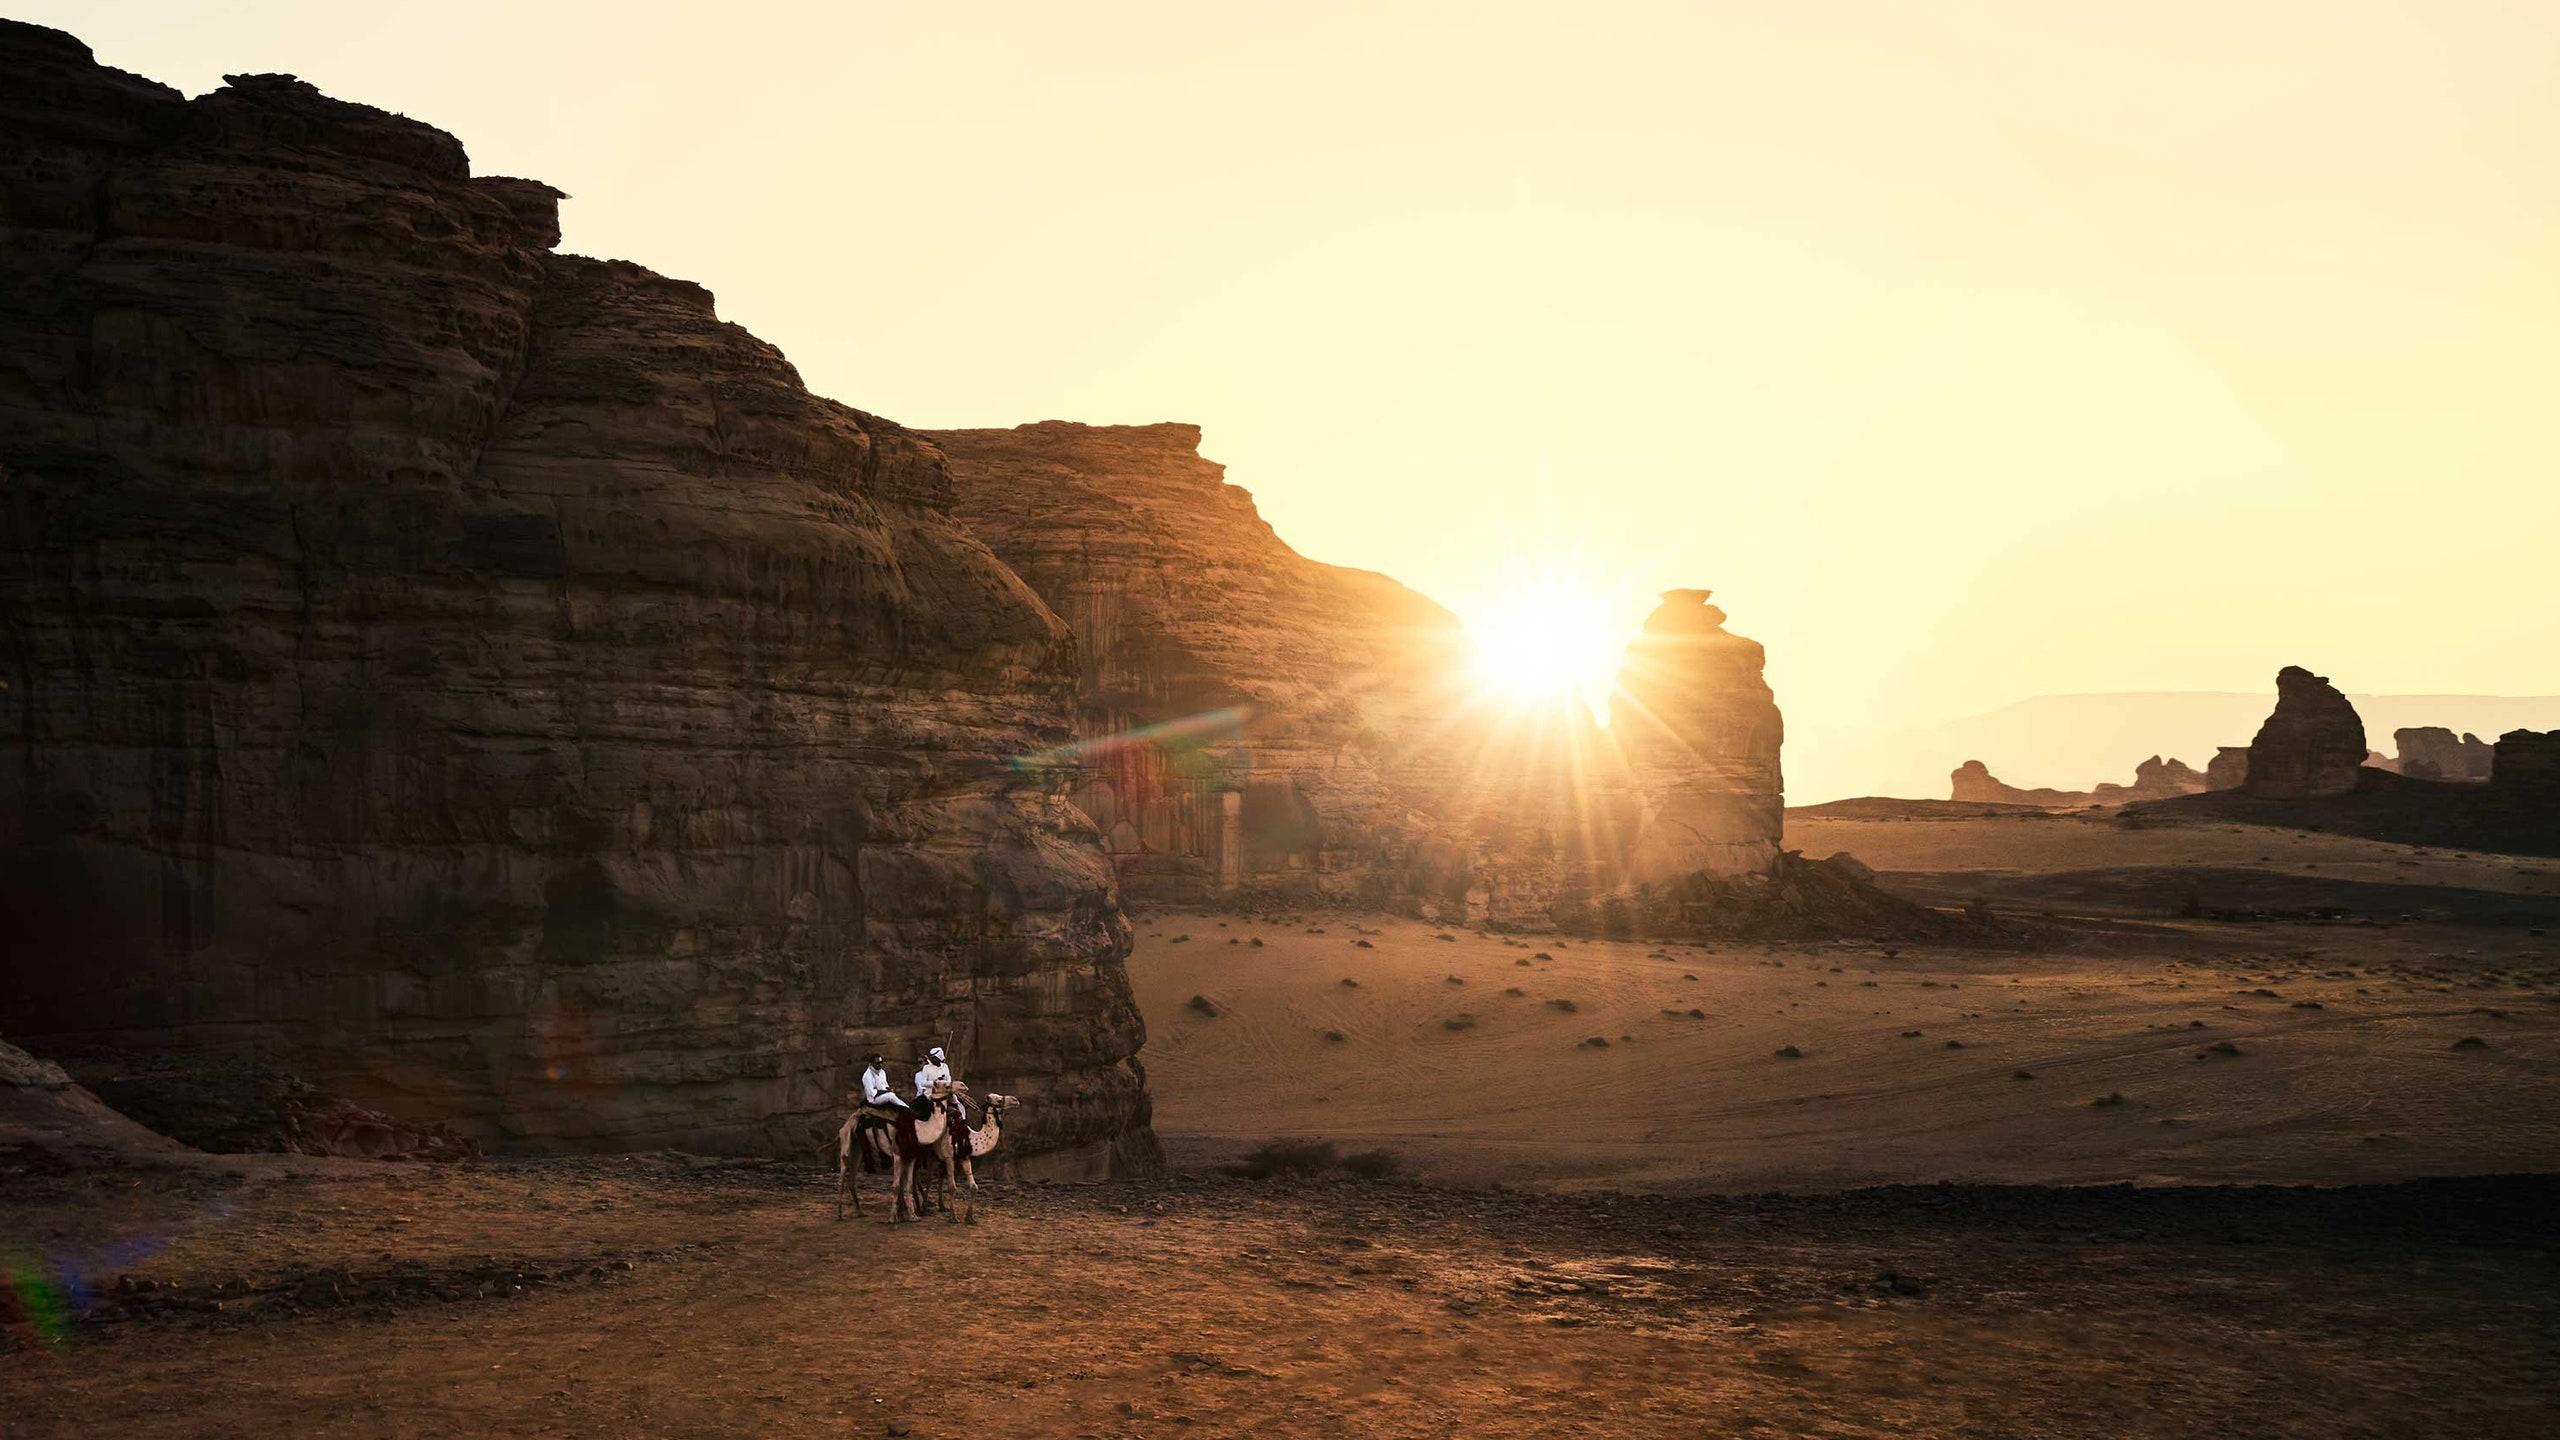 7 things to see or do in AlUla, Saudi Arabia